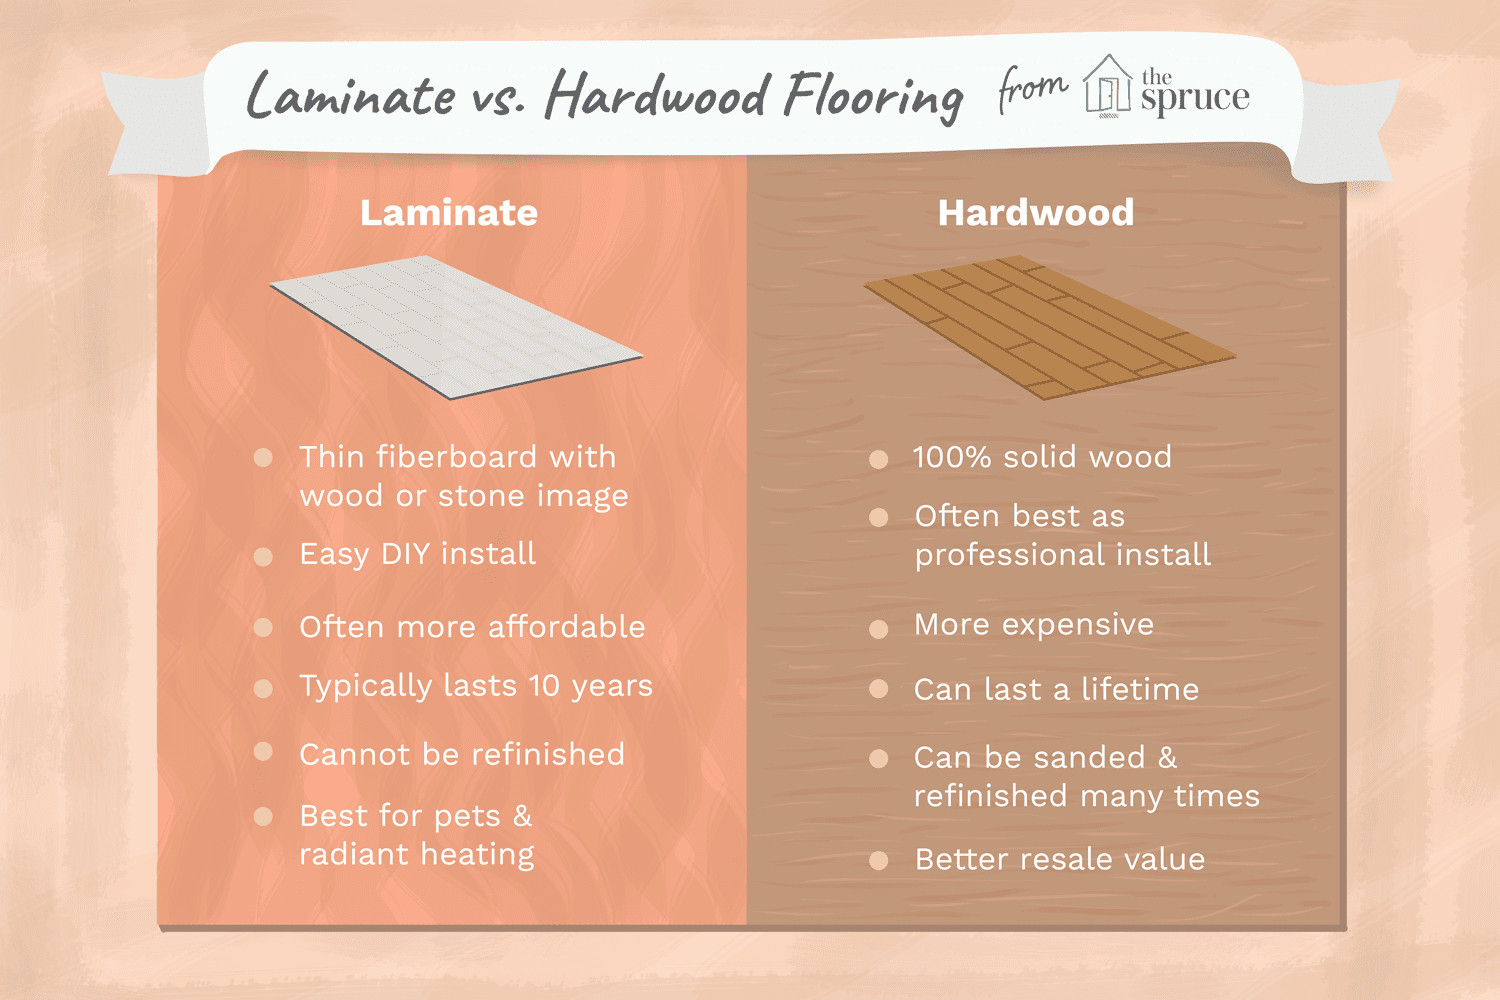 average cost per sq ft to refinish hardwood floors of laminate vs hardwood doesnt have to be a hard decision regarding hardwood doesnt have to be a hard decision